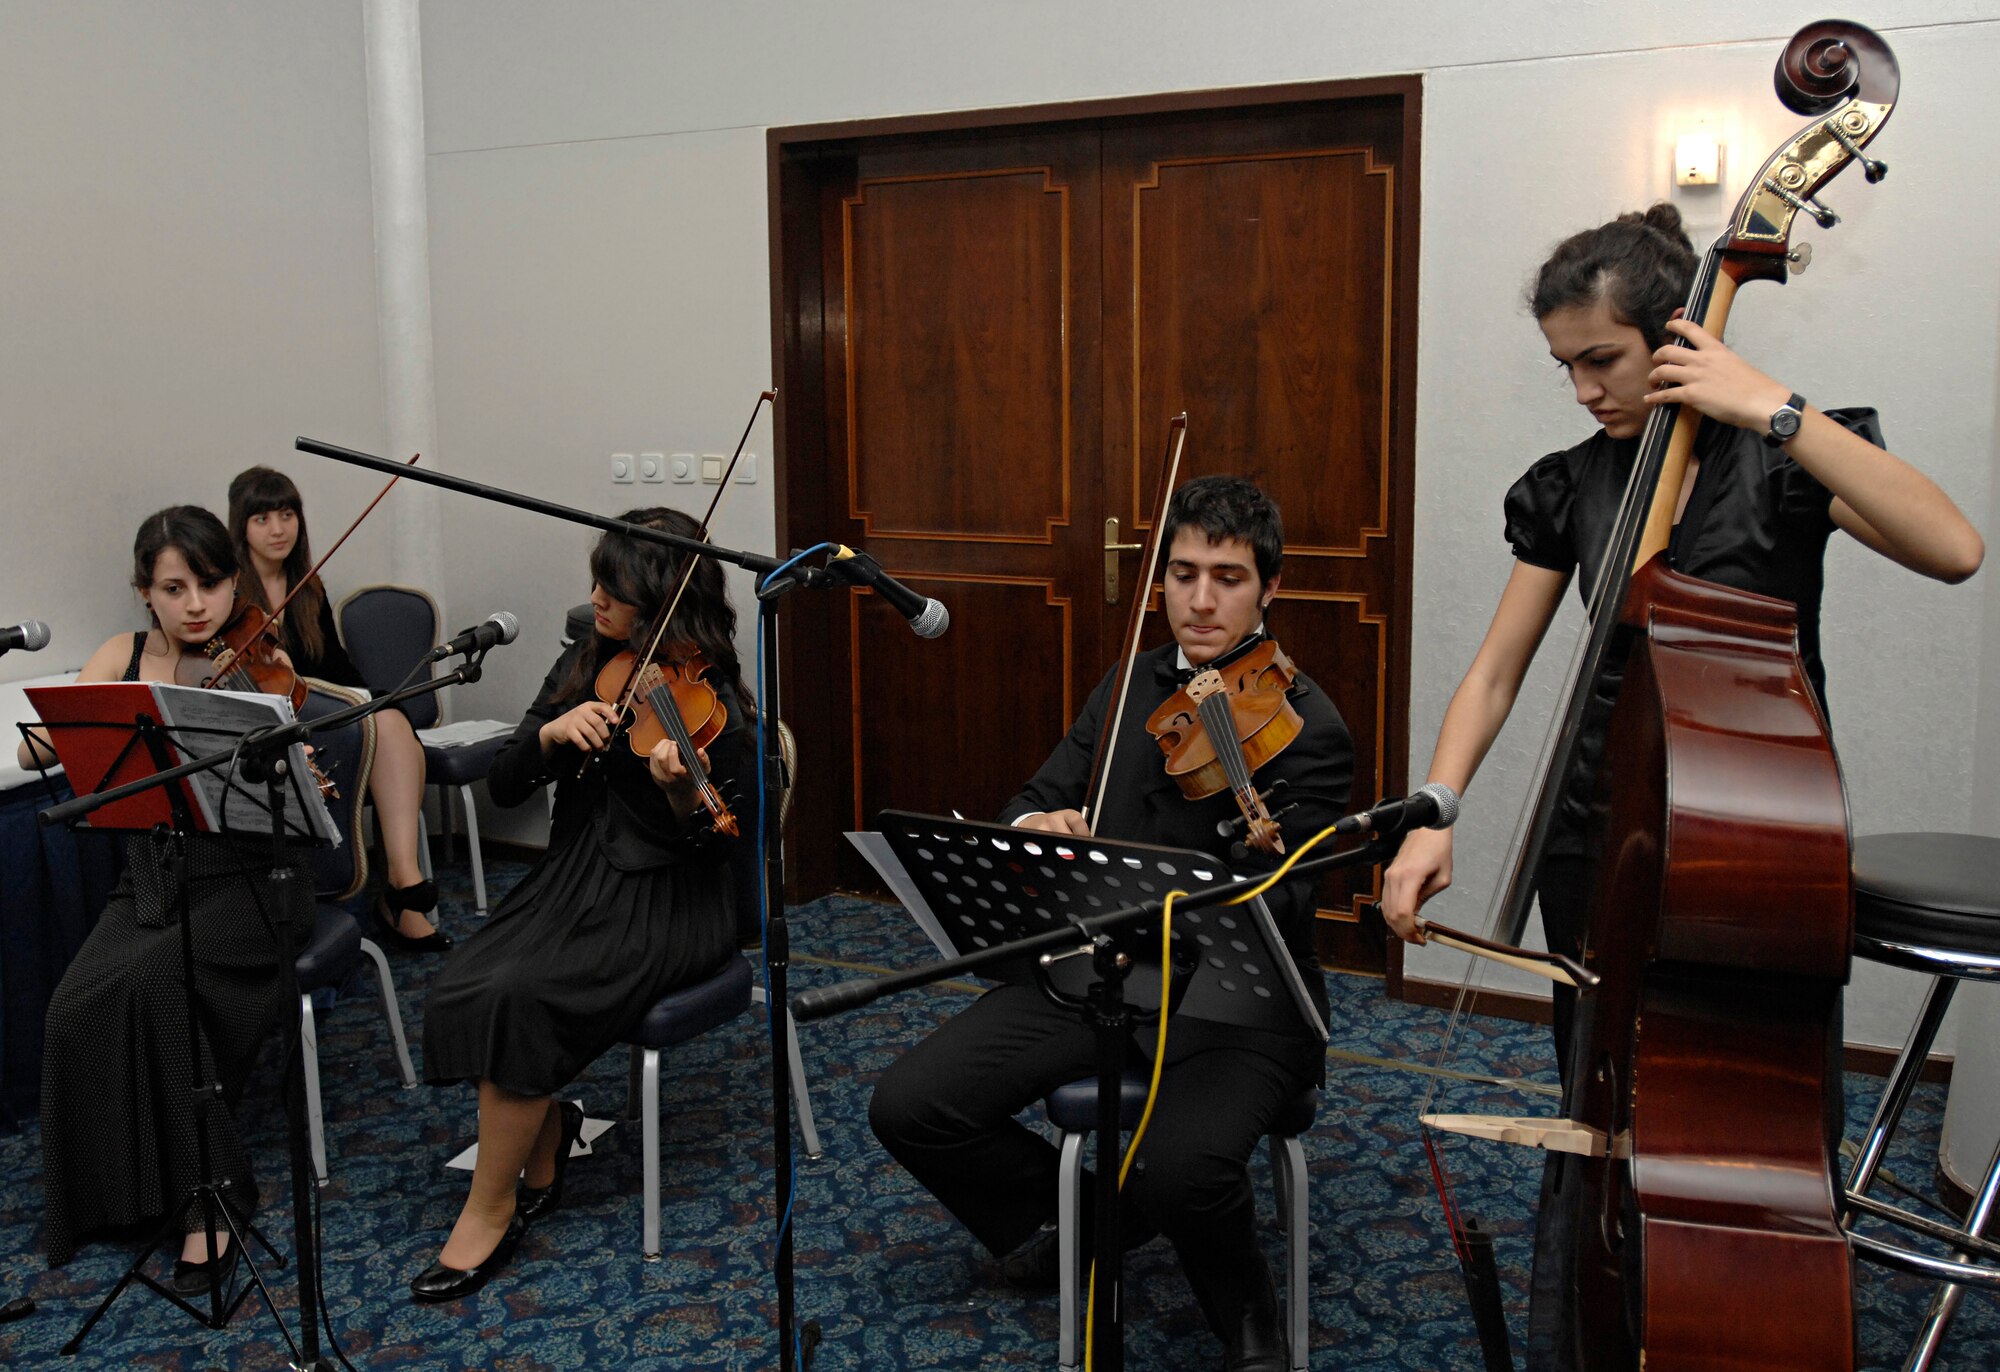 A classical music ensemble from Cukurova University Music School performs during the 39th Air Base Wing annual awards banquet, Jan. 30. The annual awards banquet is held to honor the members of the wing that stood out above their peers during the 2008 calendar year. (U.S. Air Force photo/Senior Airman Benjamin Wilson)